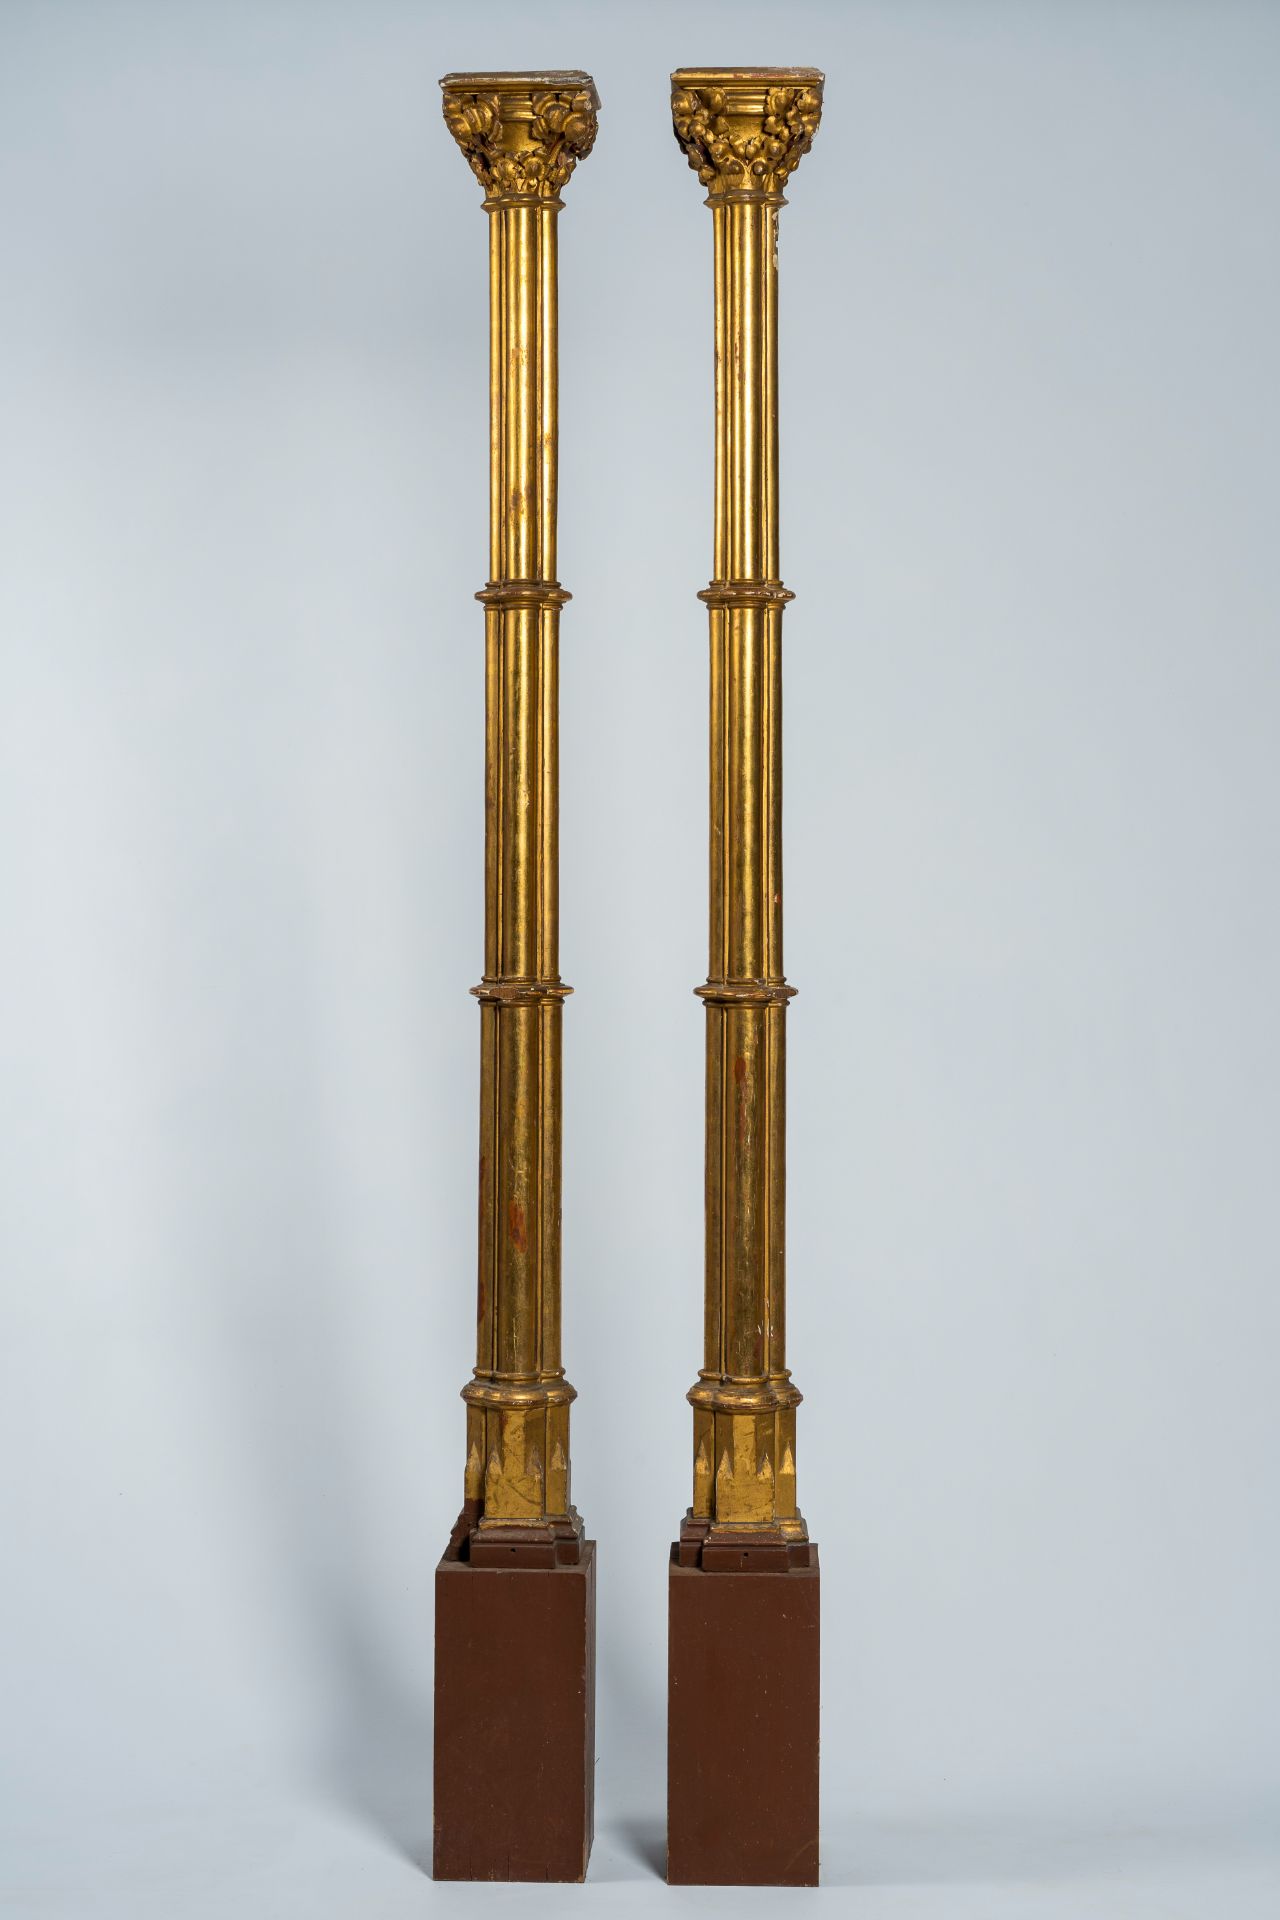 A pair of large Gothic revival gilt wood pillars, 19th C. - Image 3 of 8